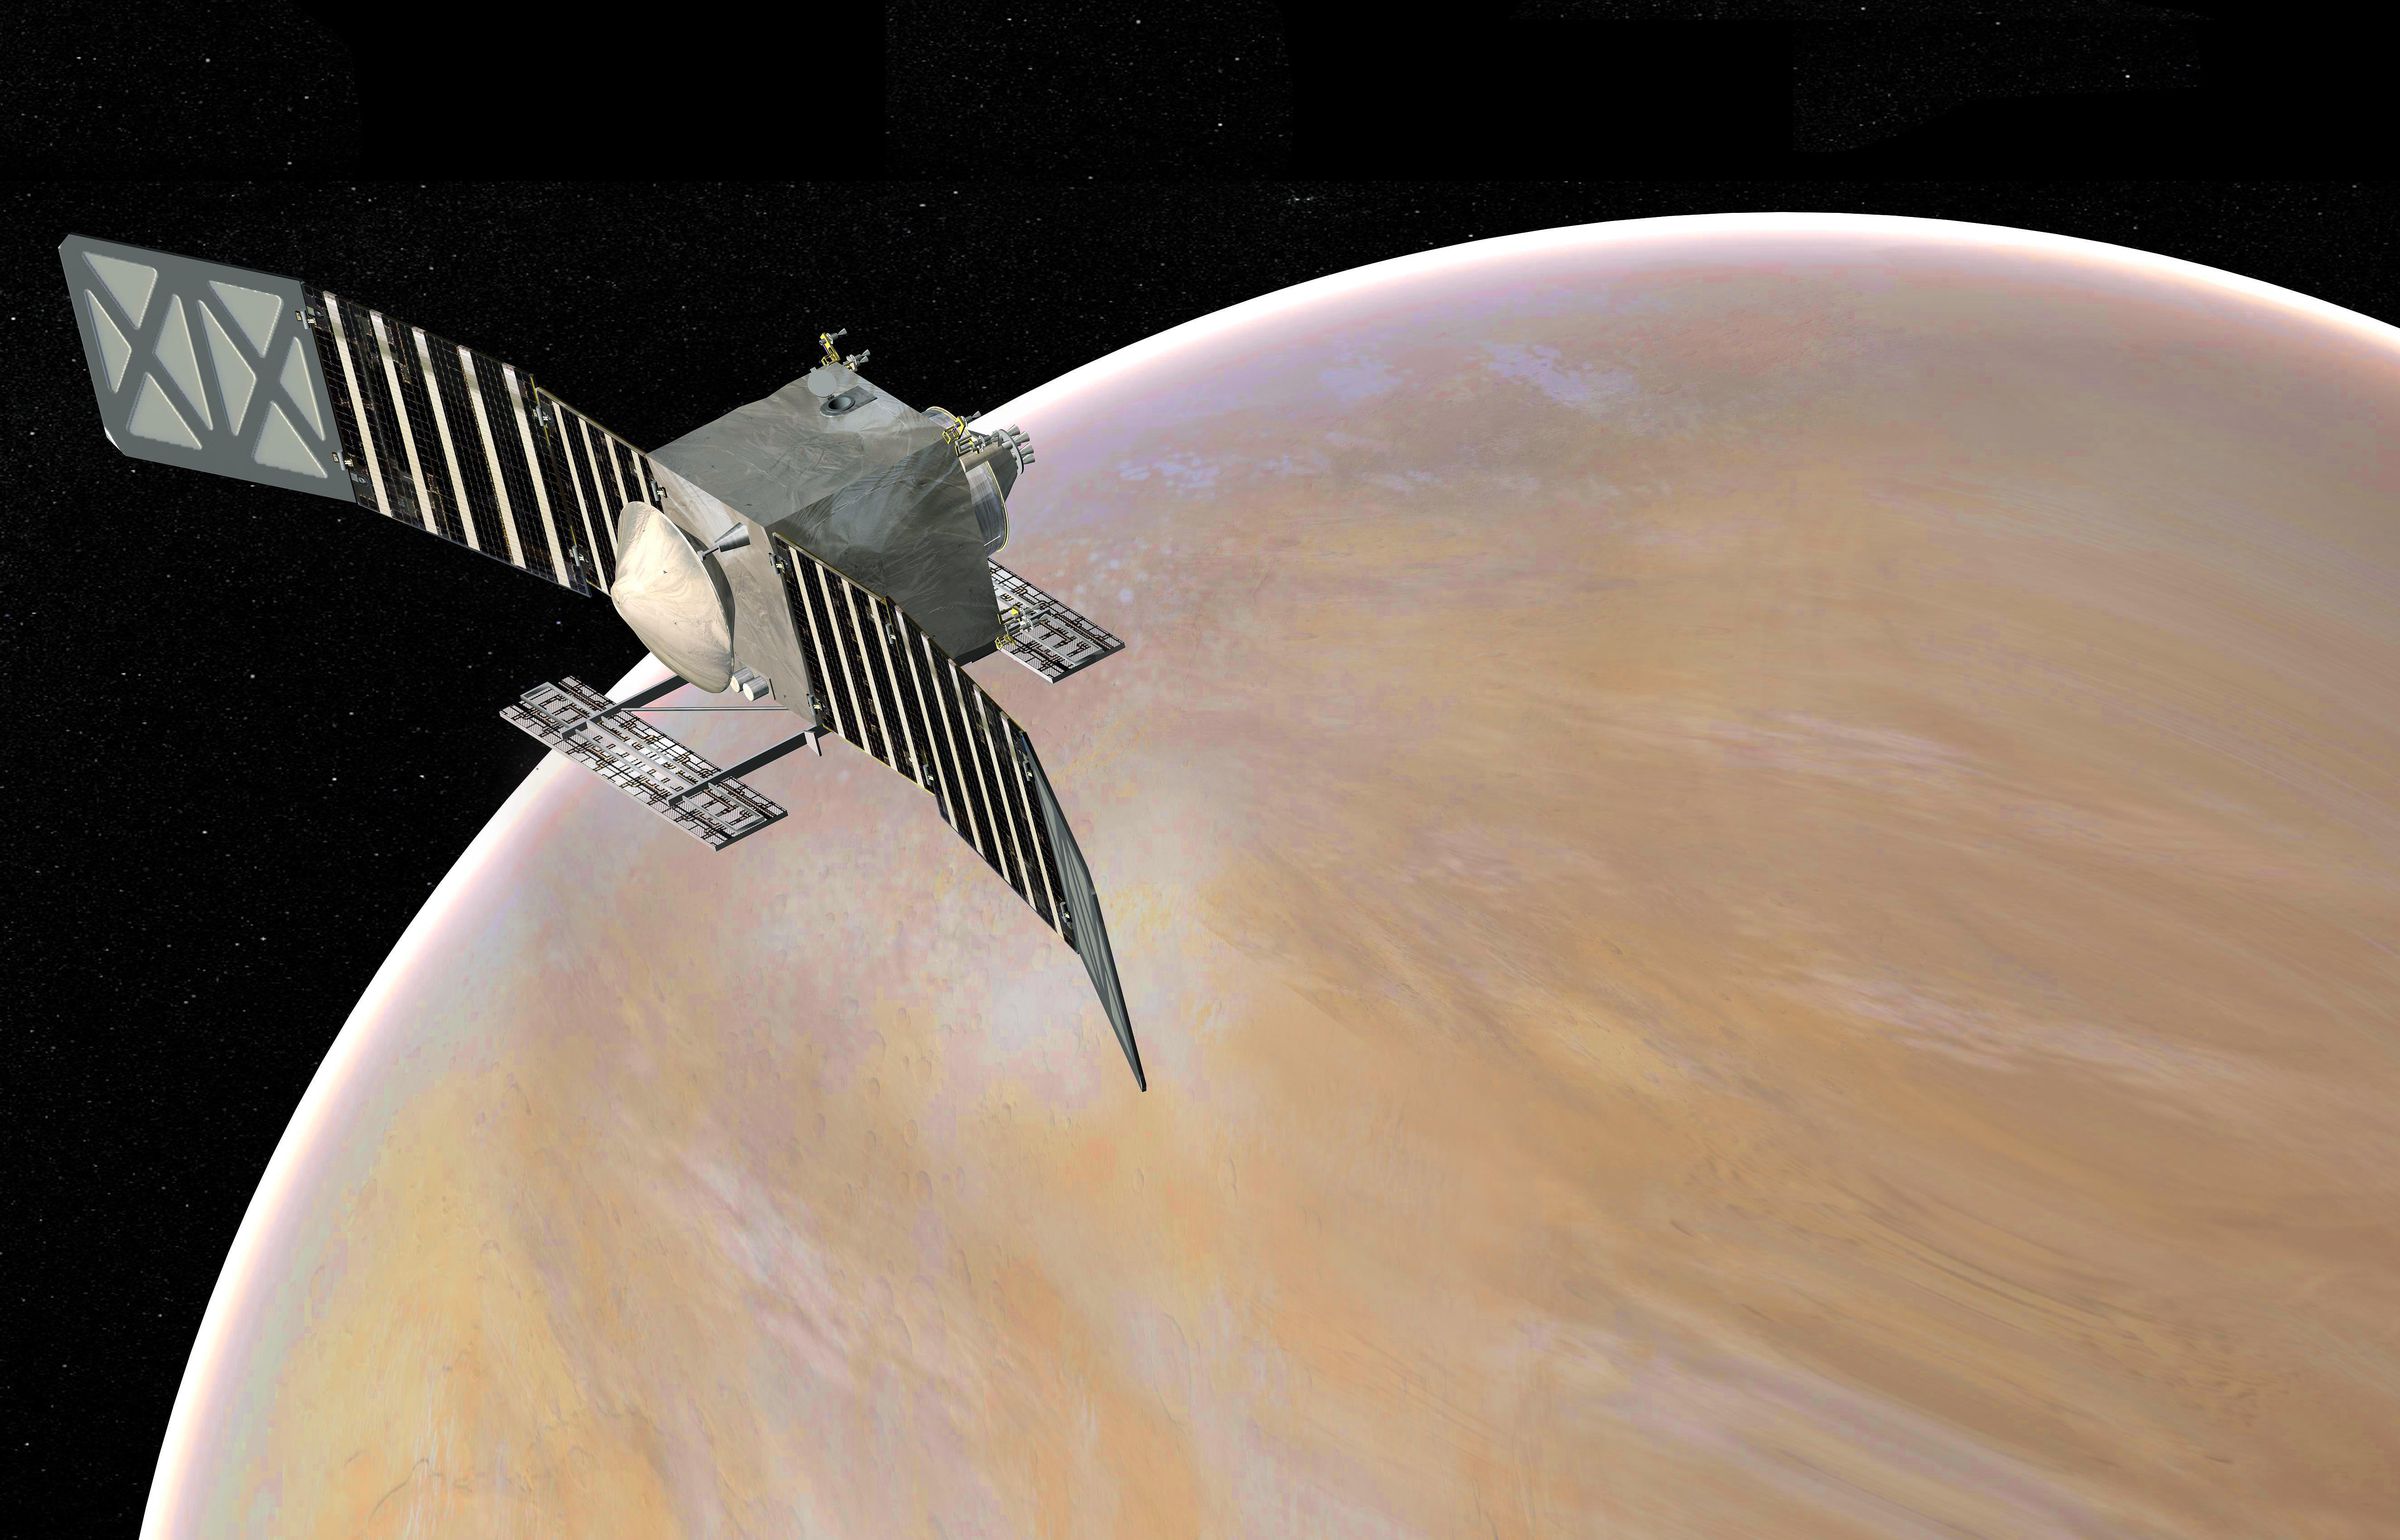 An artistic rendering of the Veritas spacecraft, a proposed mission to Venus out of NASA’s Jet Propulsion Laboratory.